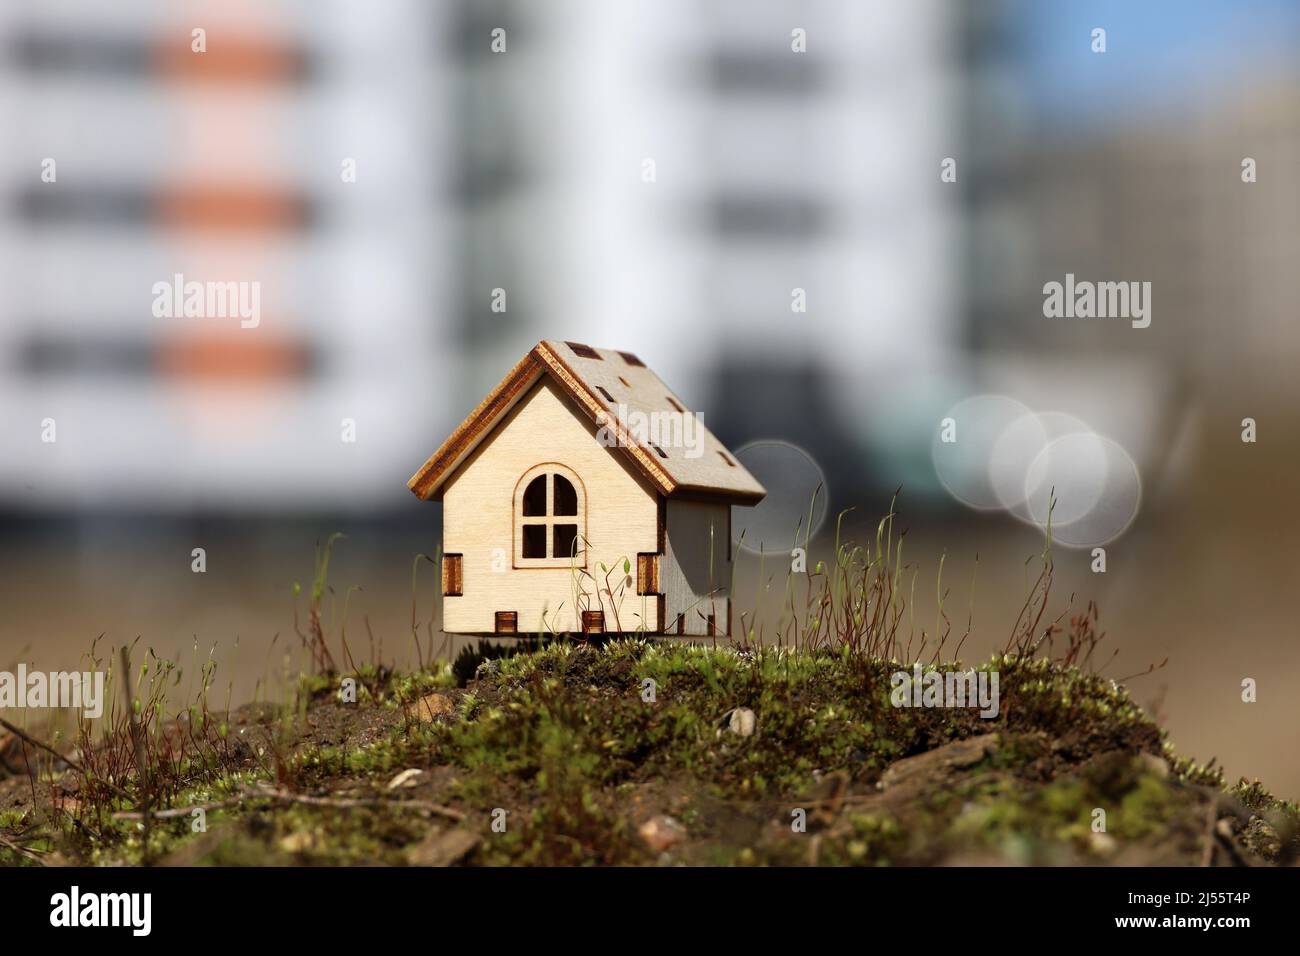 Wooden house model on background of high-rise residential buildings. Concept of country cottage, real estate in ecologically clean area Stock Photo